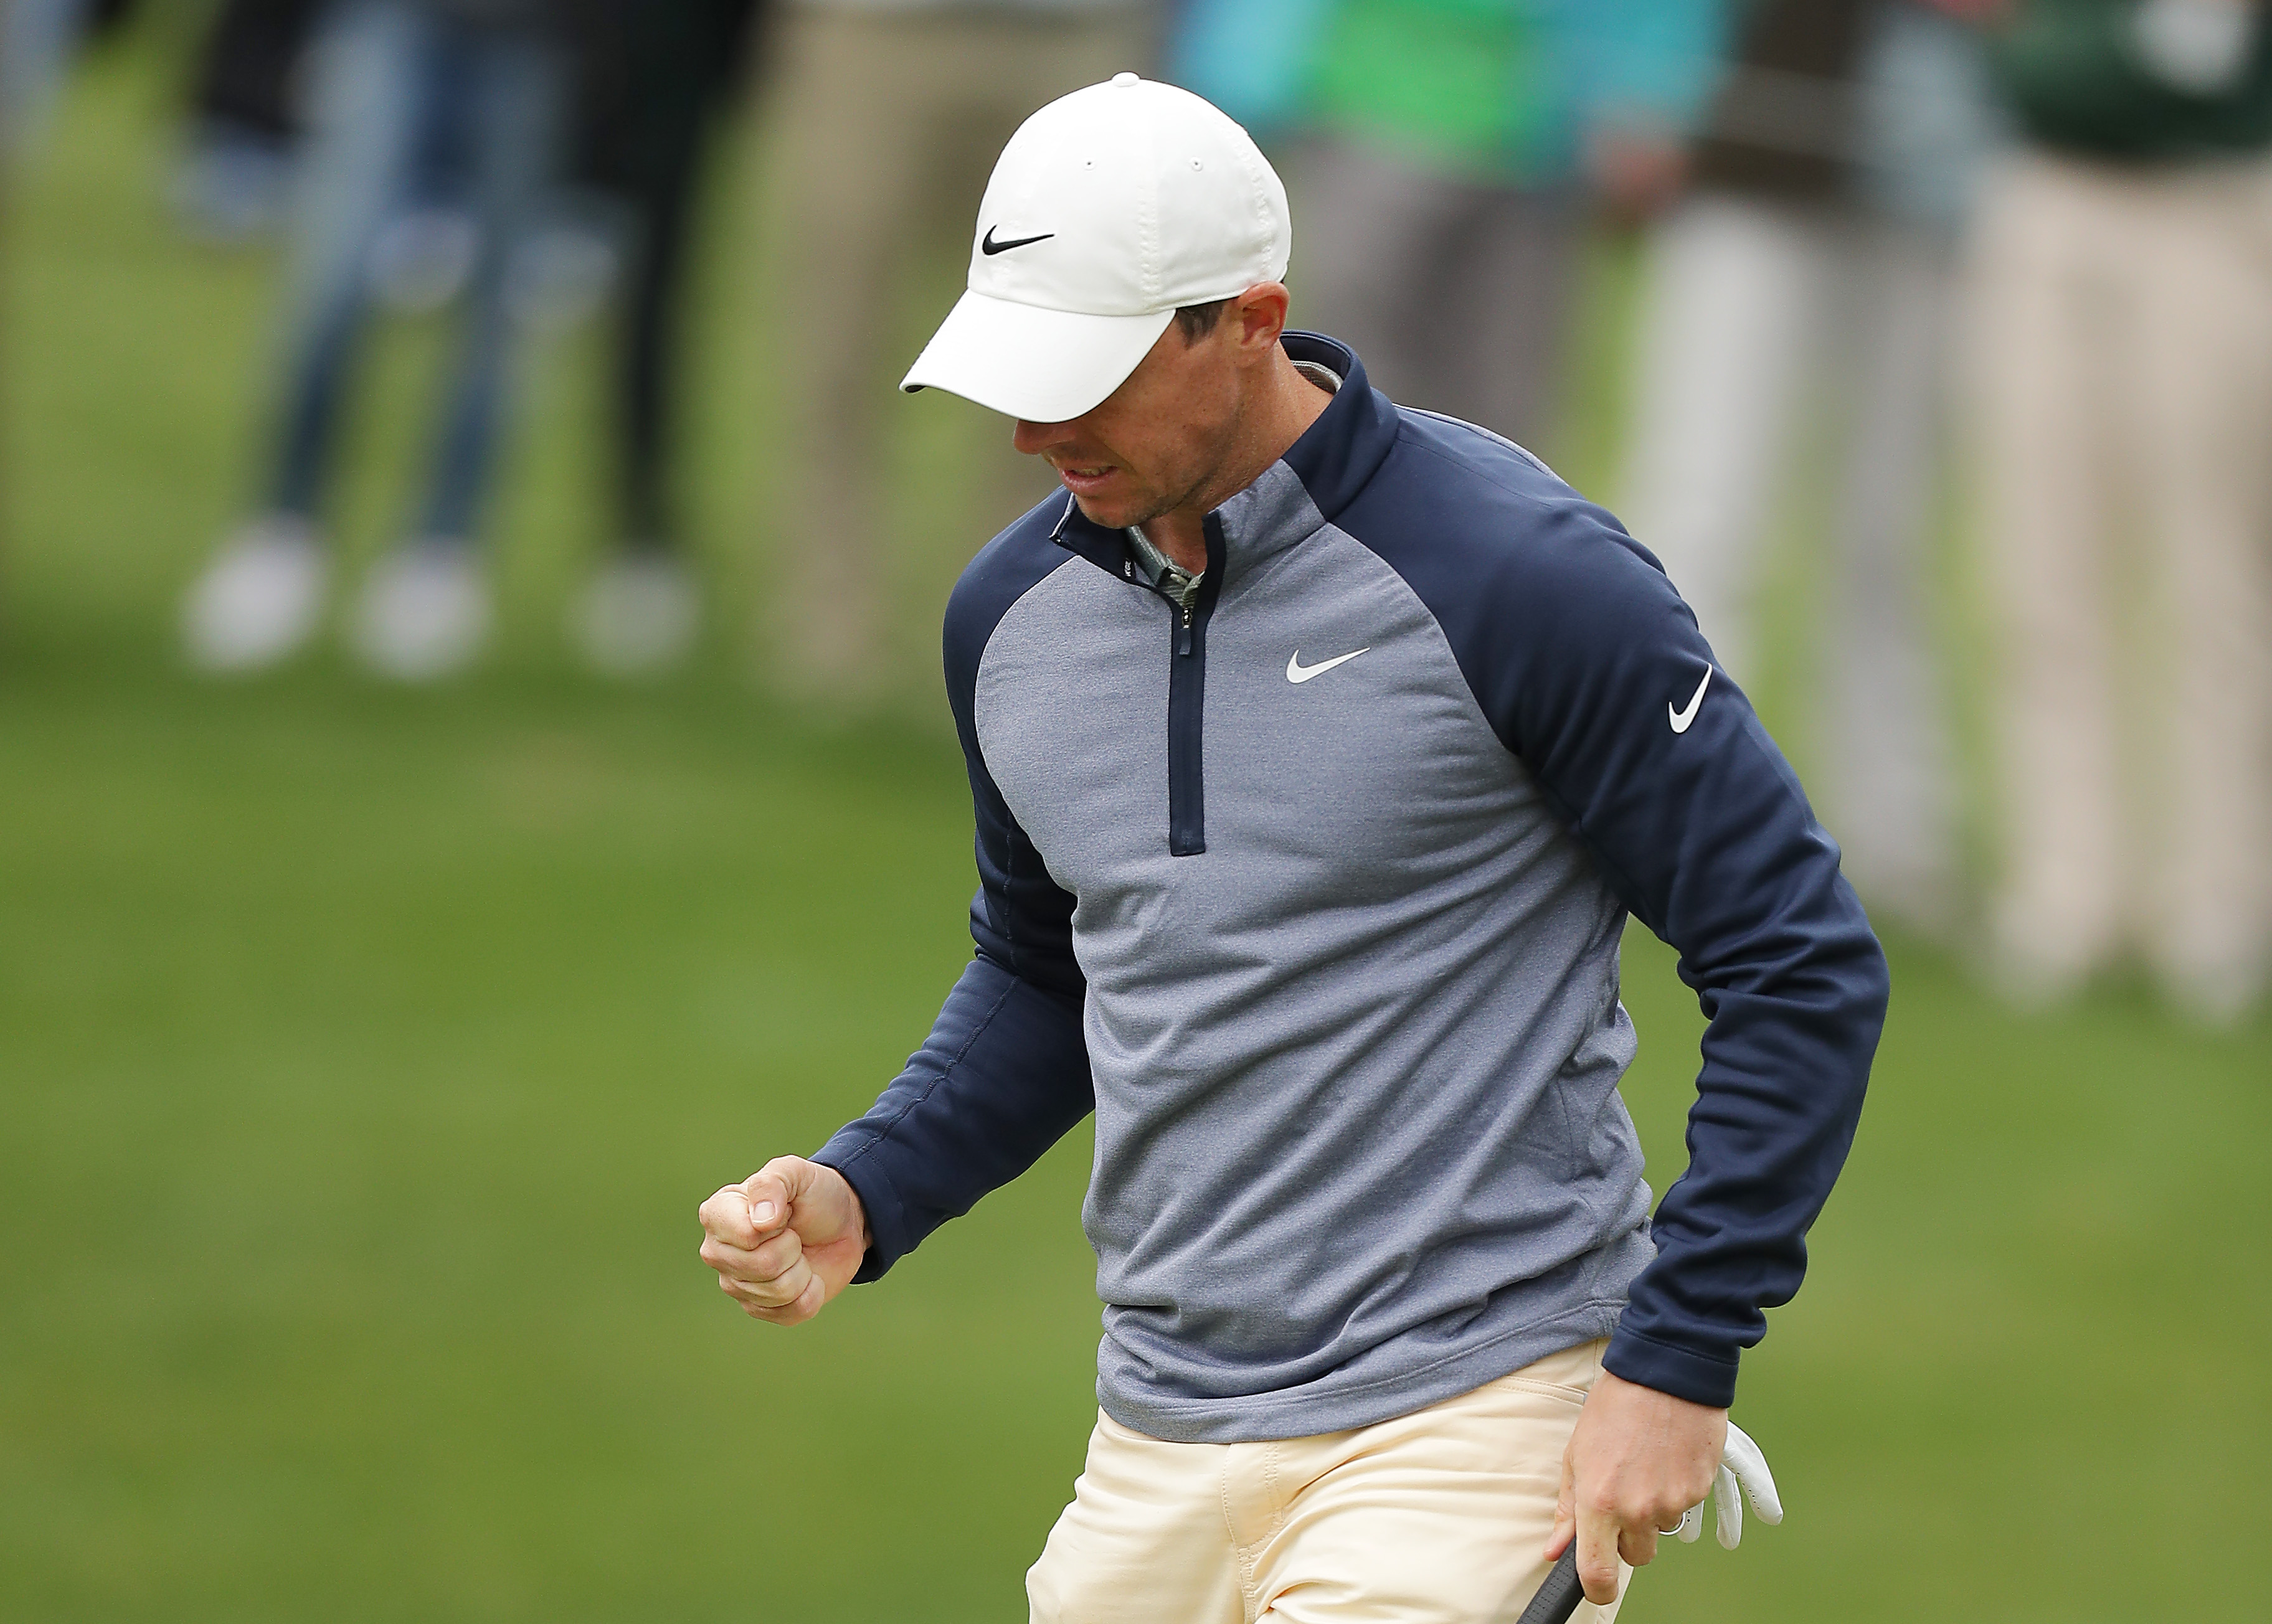 Rory McIlroy wins The Players, says I'm playing my best golf ever